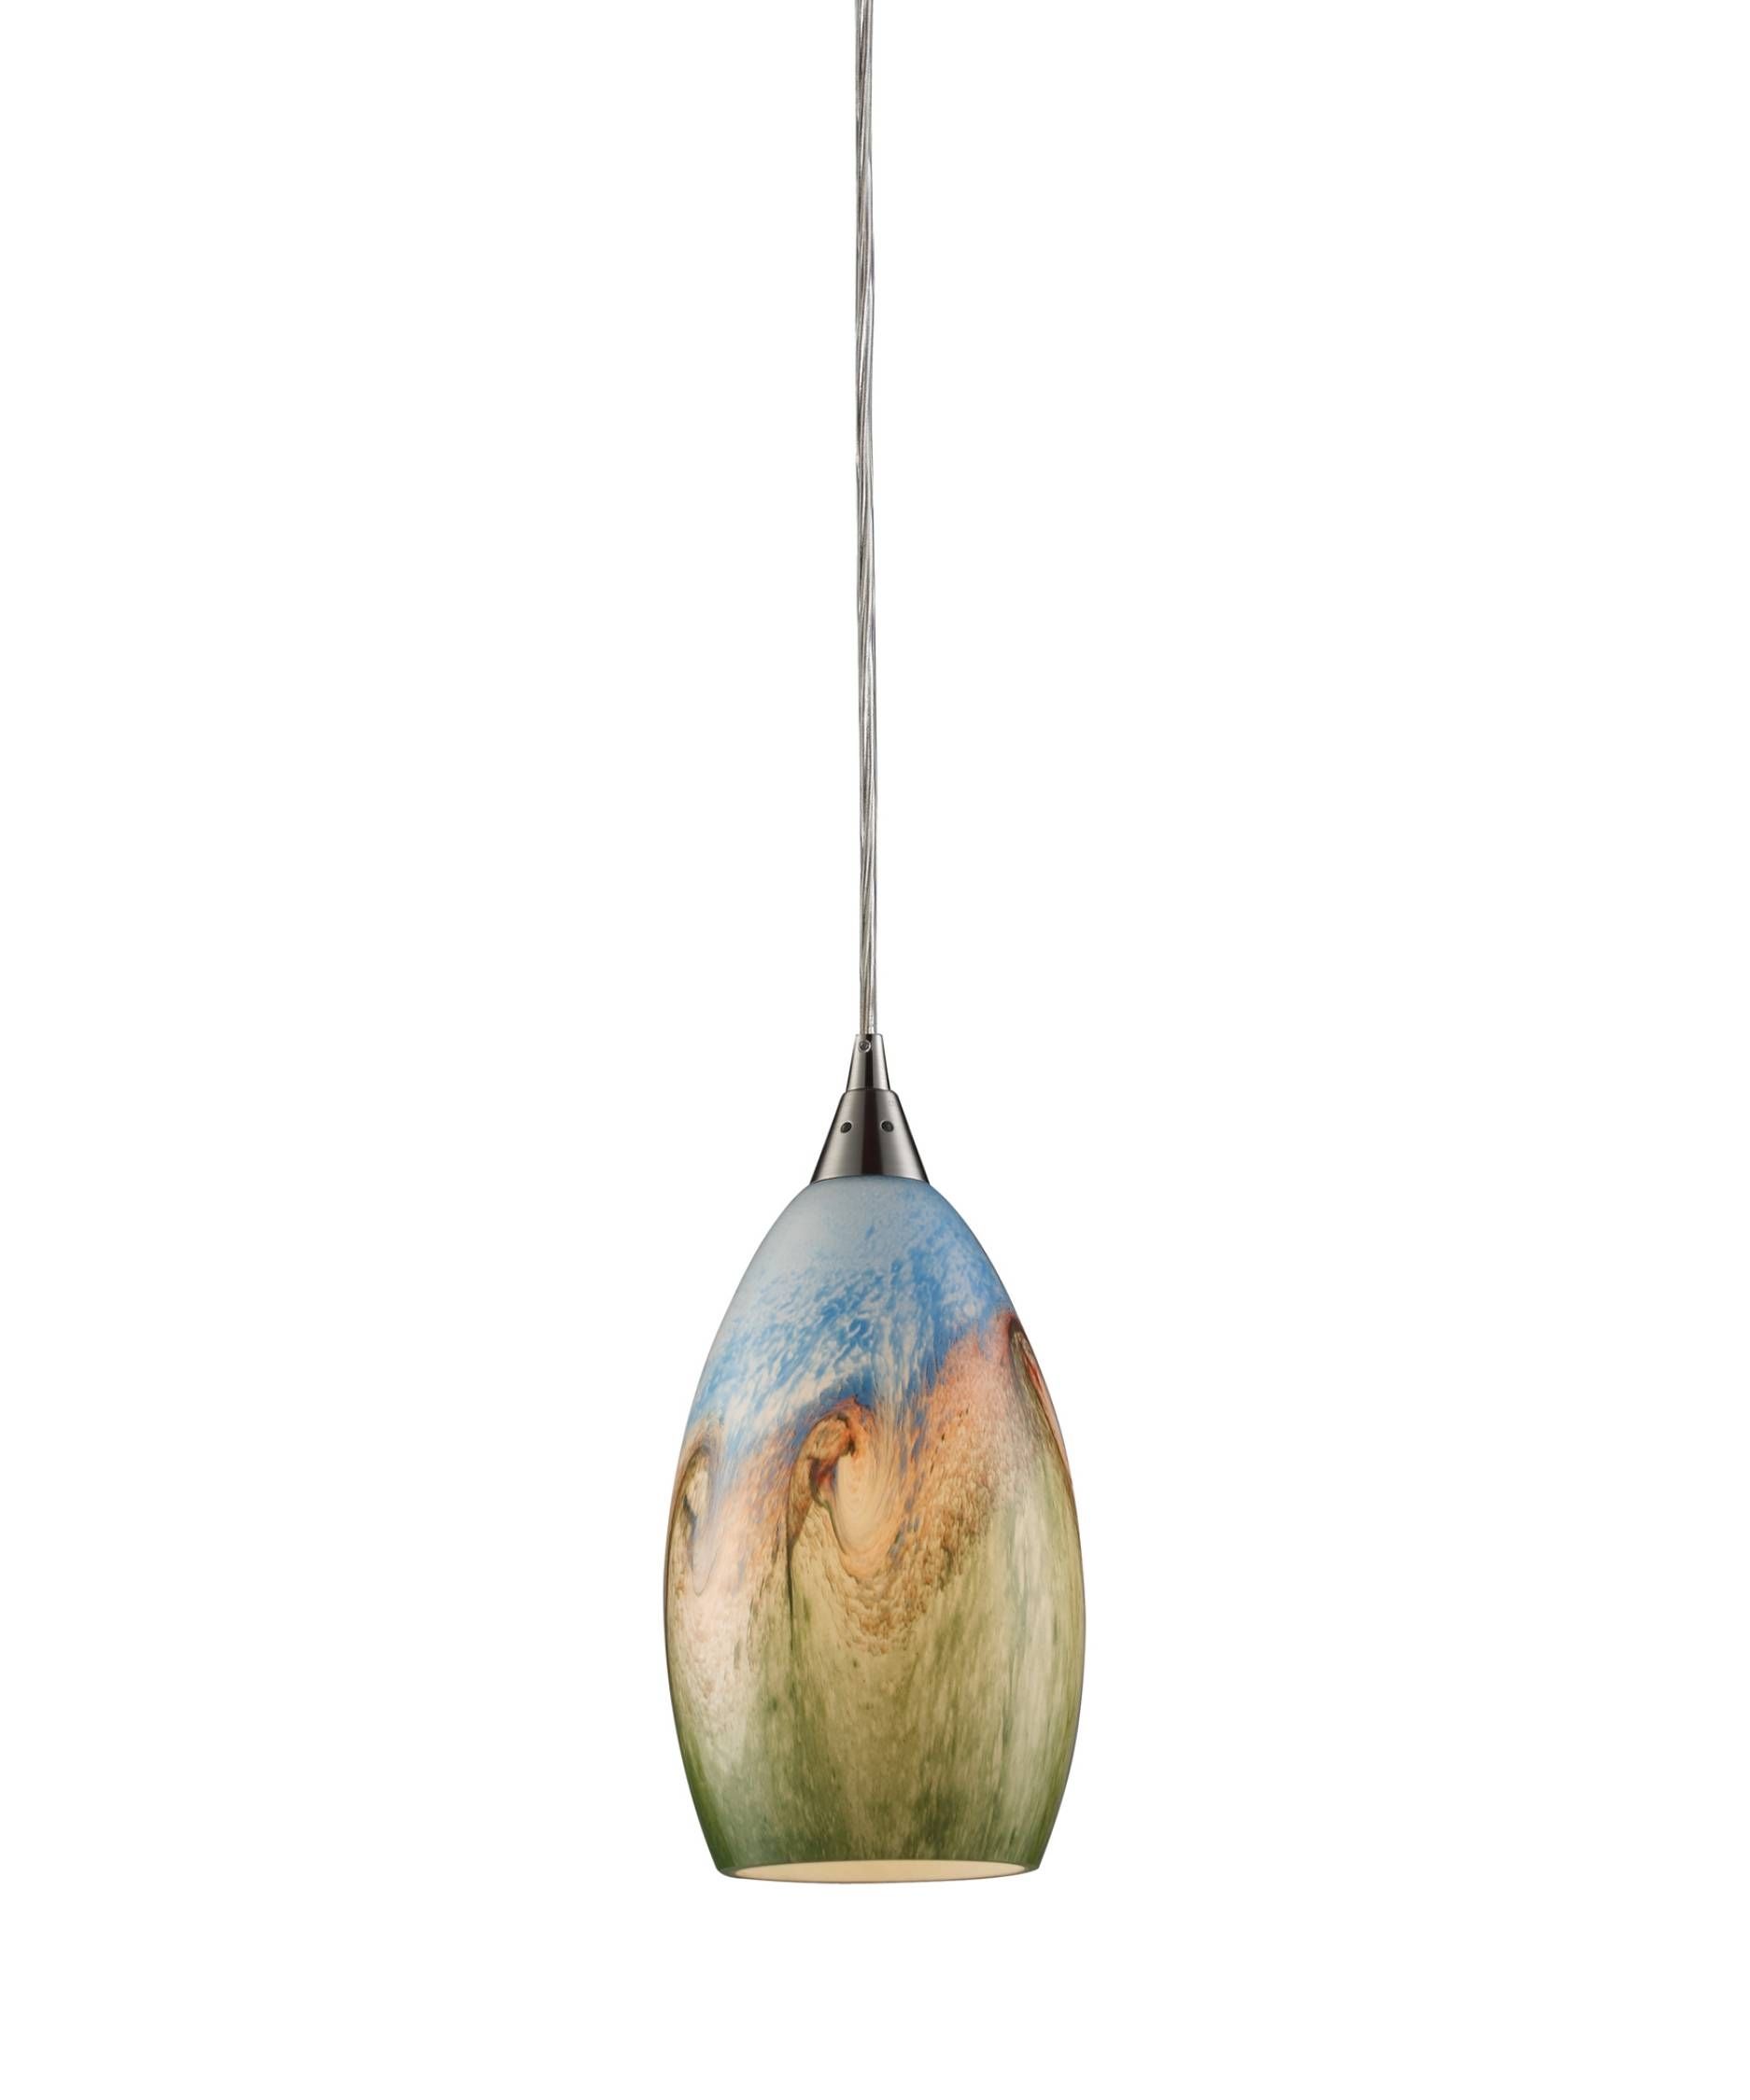 Hand Blown Glass Mini Pendant Lights – Baby Exit Intended For Blown Glass Mini Pendant Lights (View 3 of 15)